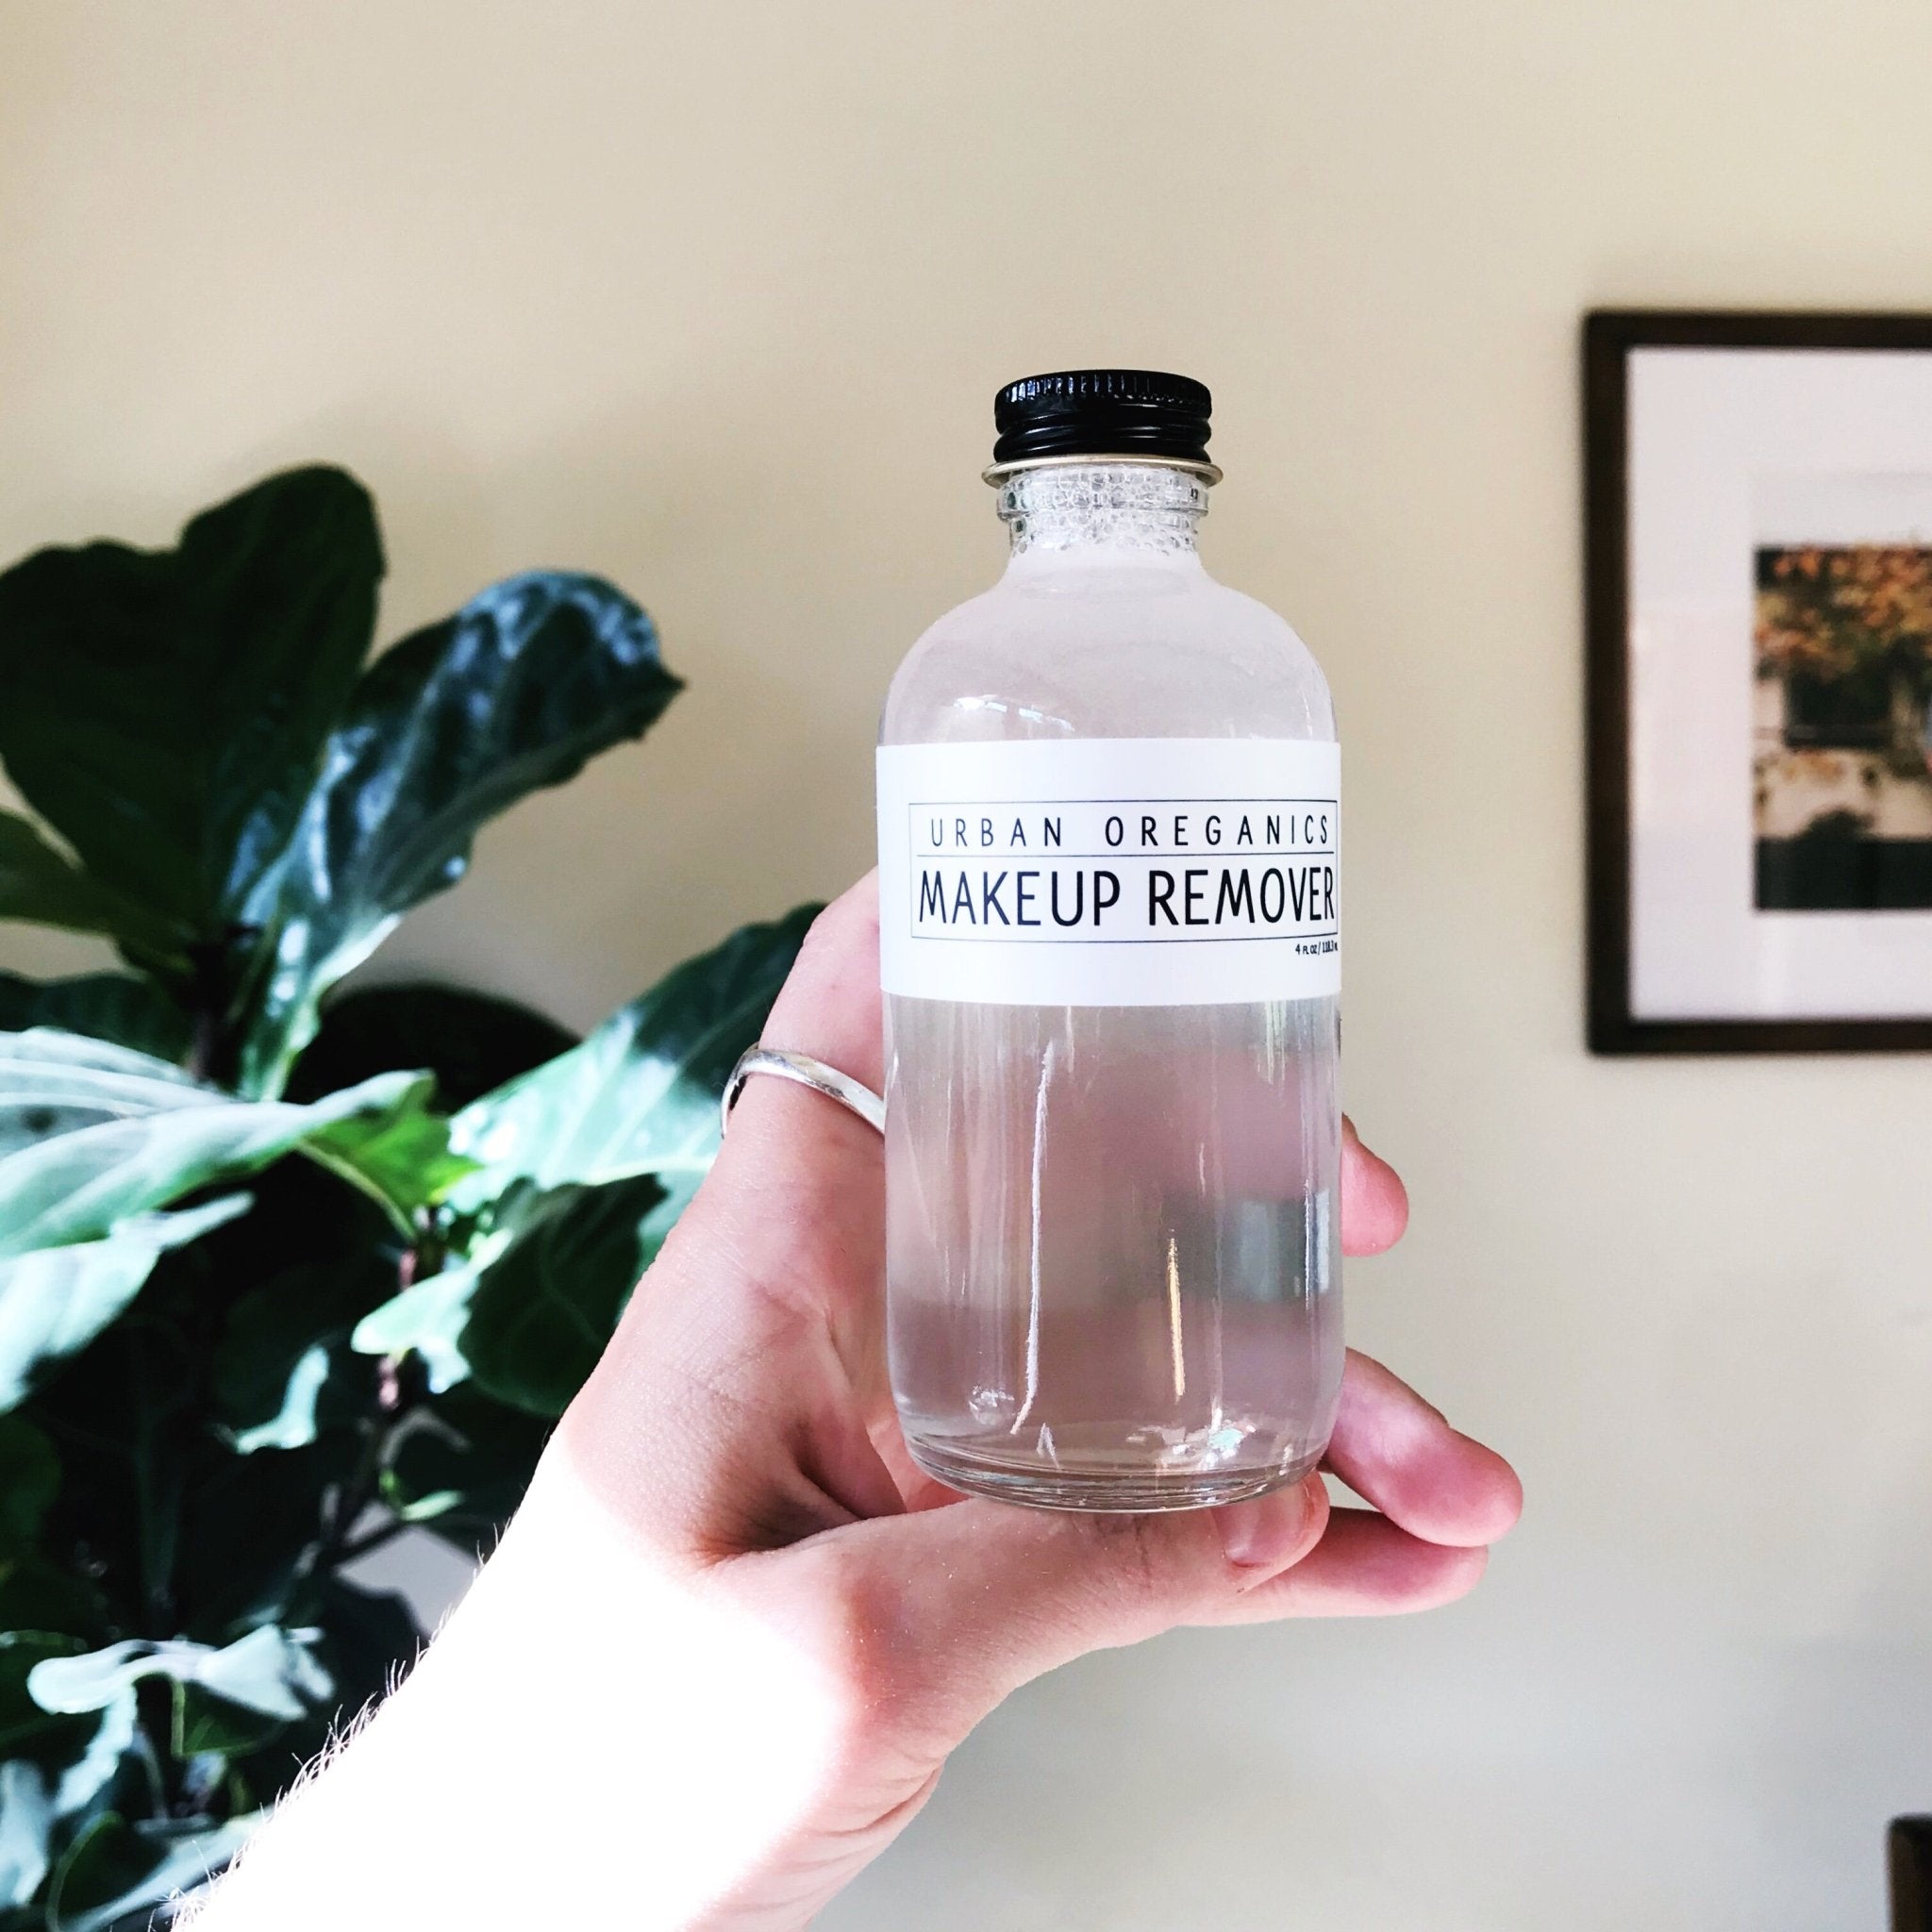 Makeup Remover - Marley's Monsters